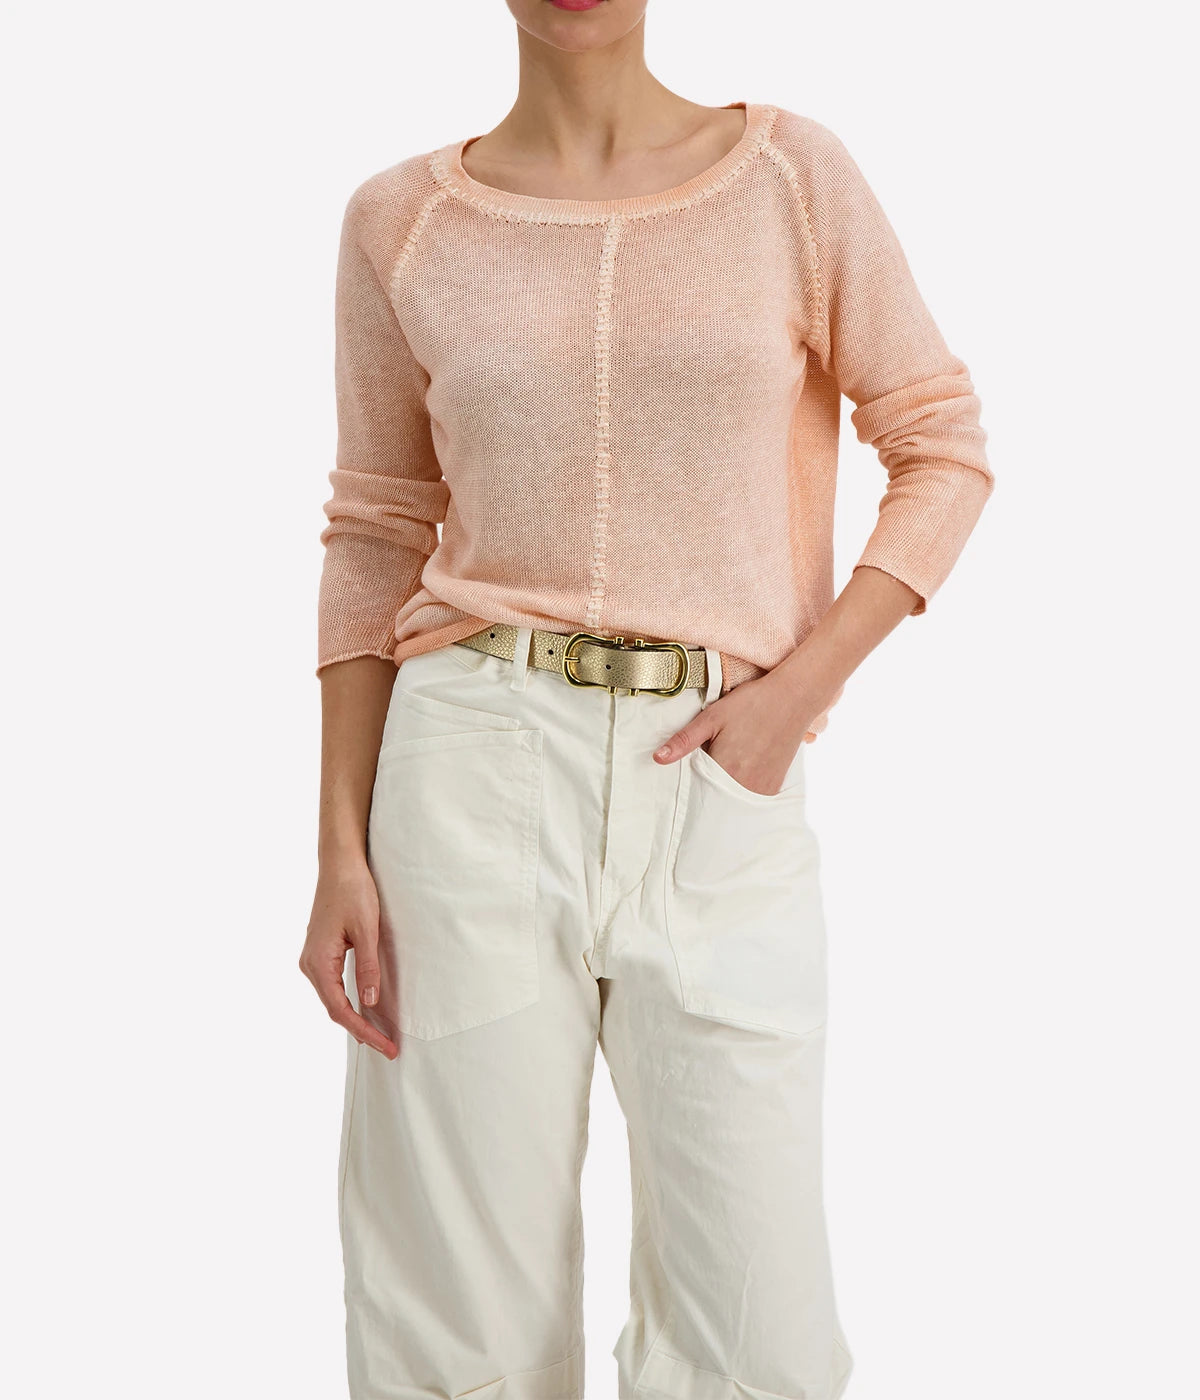 Peach coloured linen boatneck knit sweater by Avant Toi